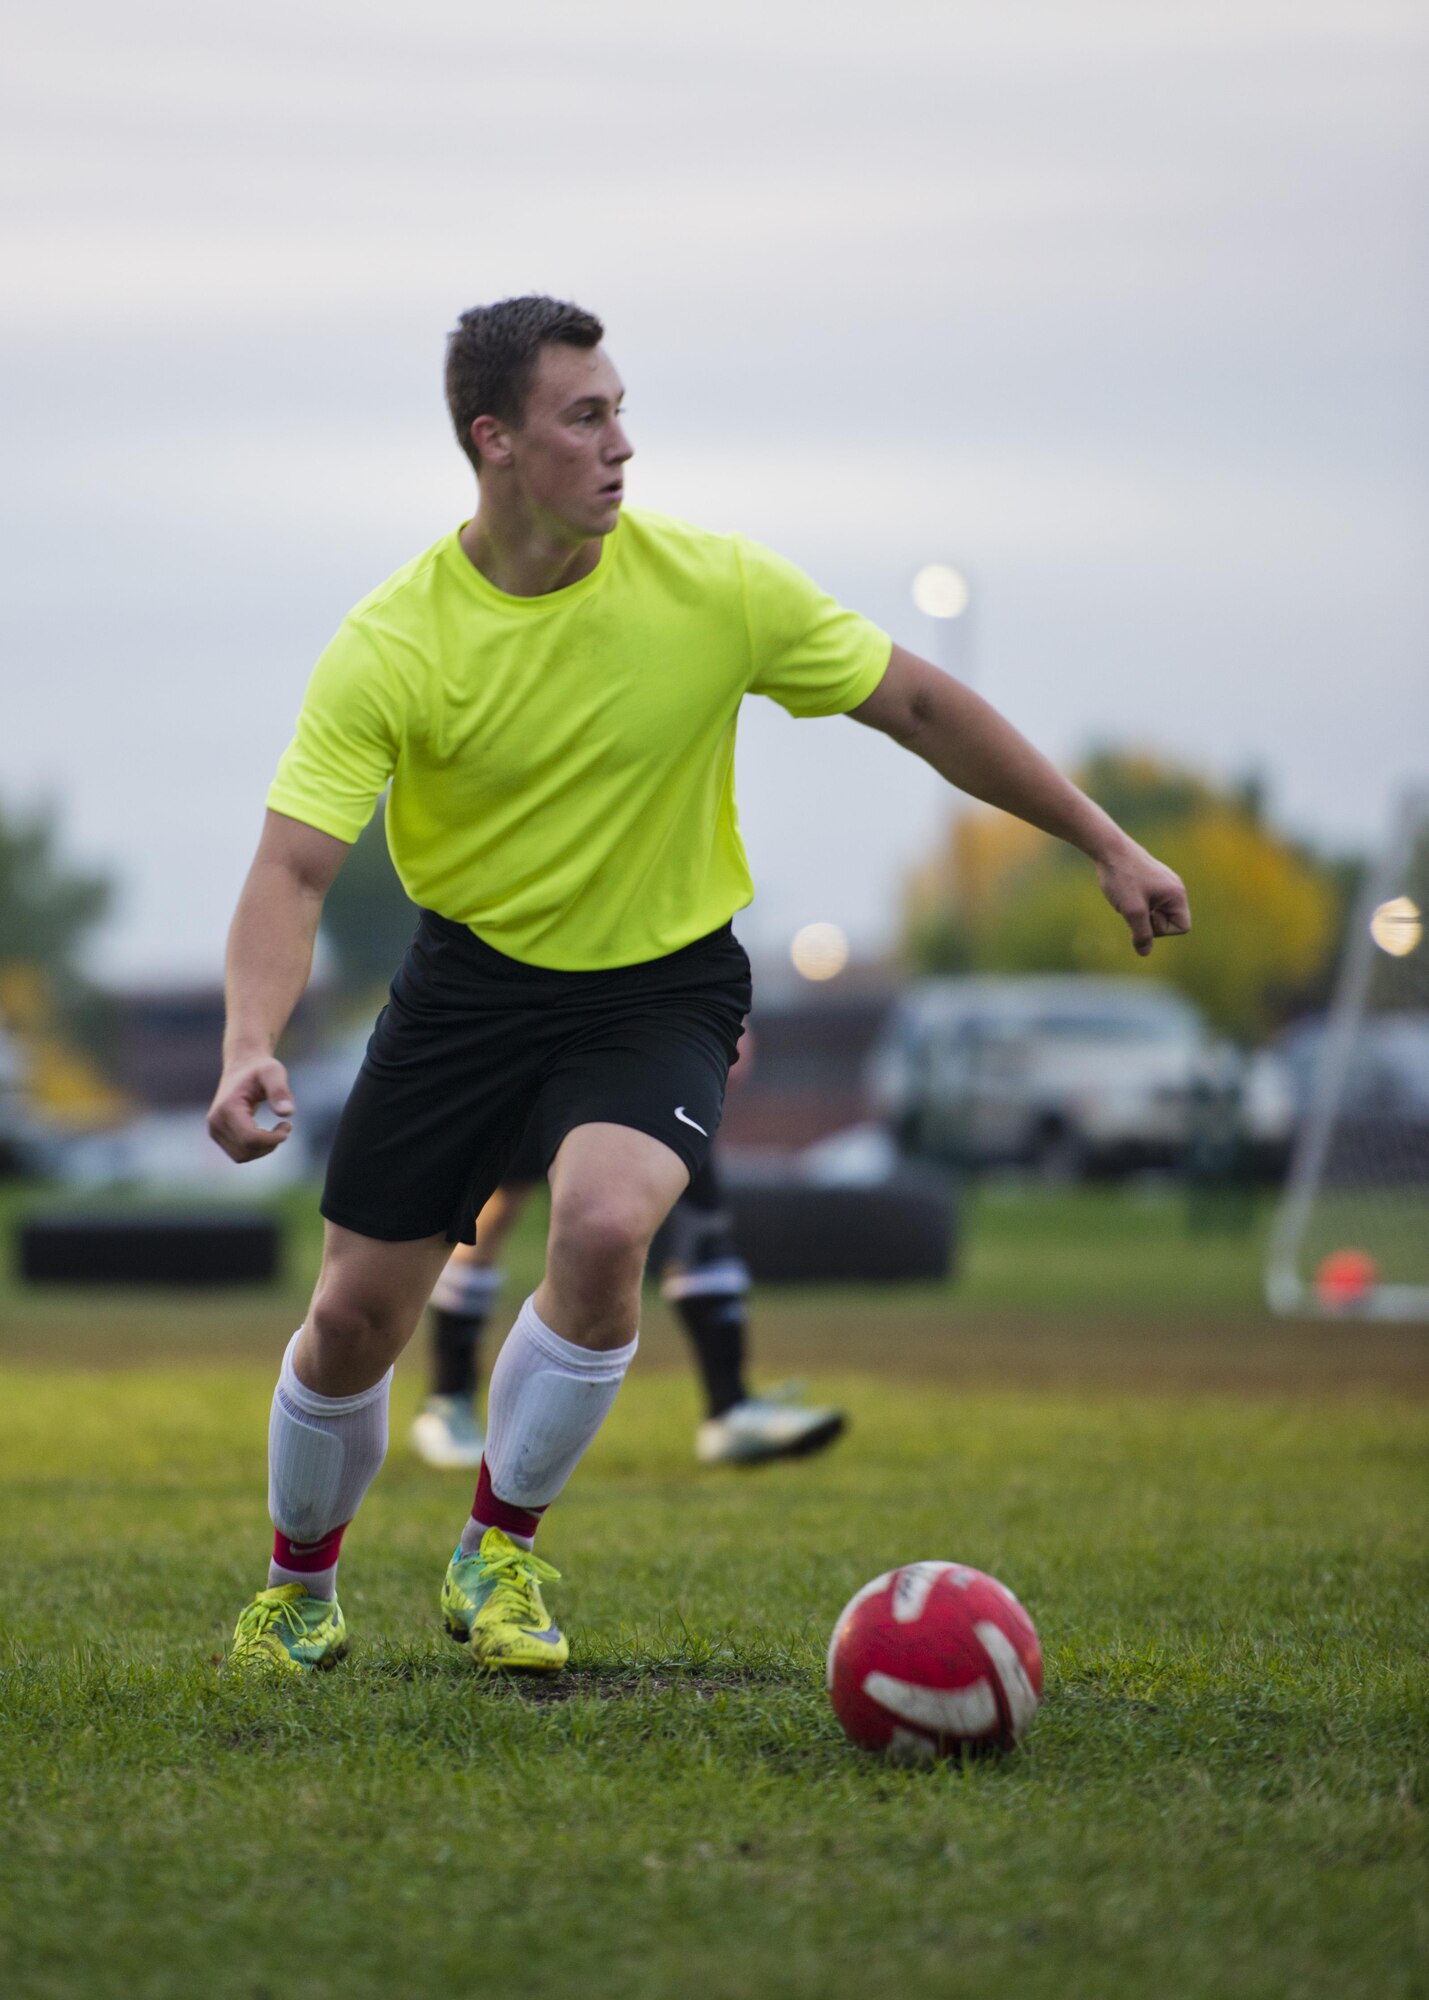 A member of the 5th Security Forces Squadron dribbles the ball during the intramural soccer championship tournament at Minot Air Force Base, N.D., Sept. 21, 2016. The 91st Missile Security Forces Squadron advanced to the next round, beating the 5th Security Forces Squadron.  (U.S. Air Force photo/Airman 1st Class J.T. Armstrong)